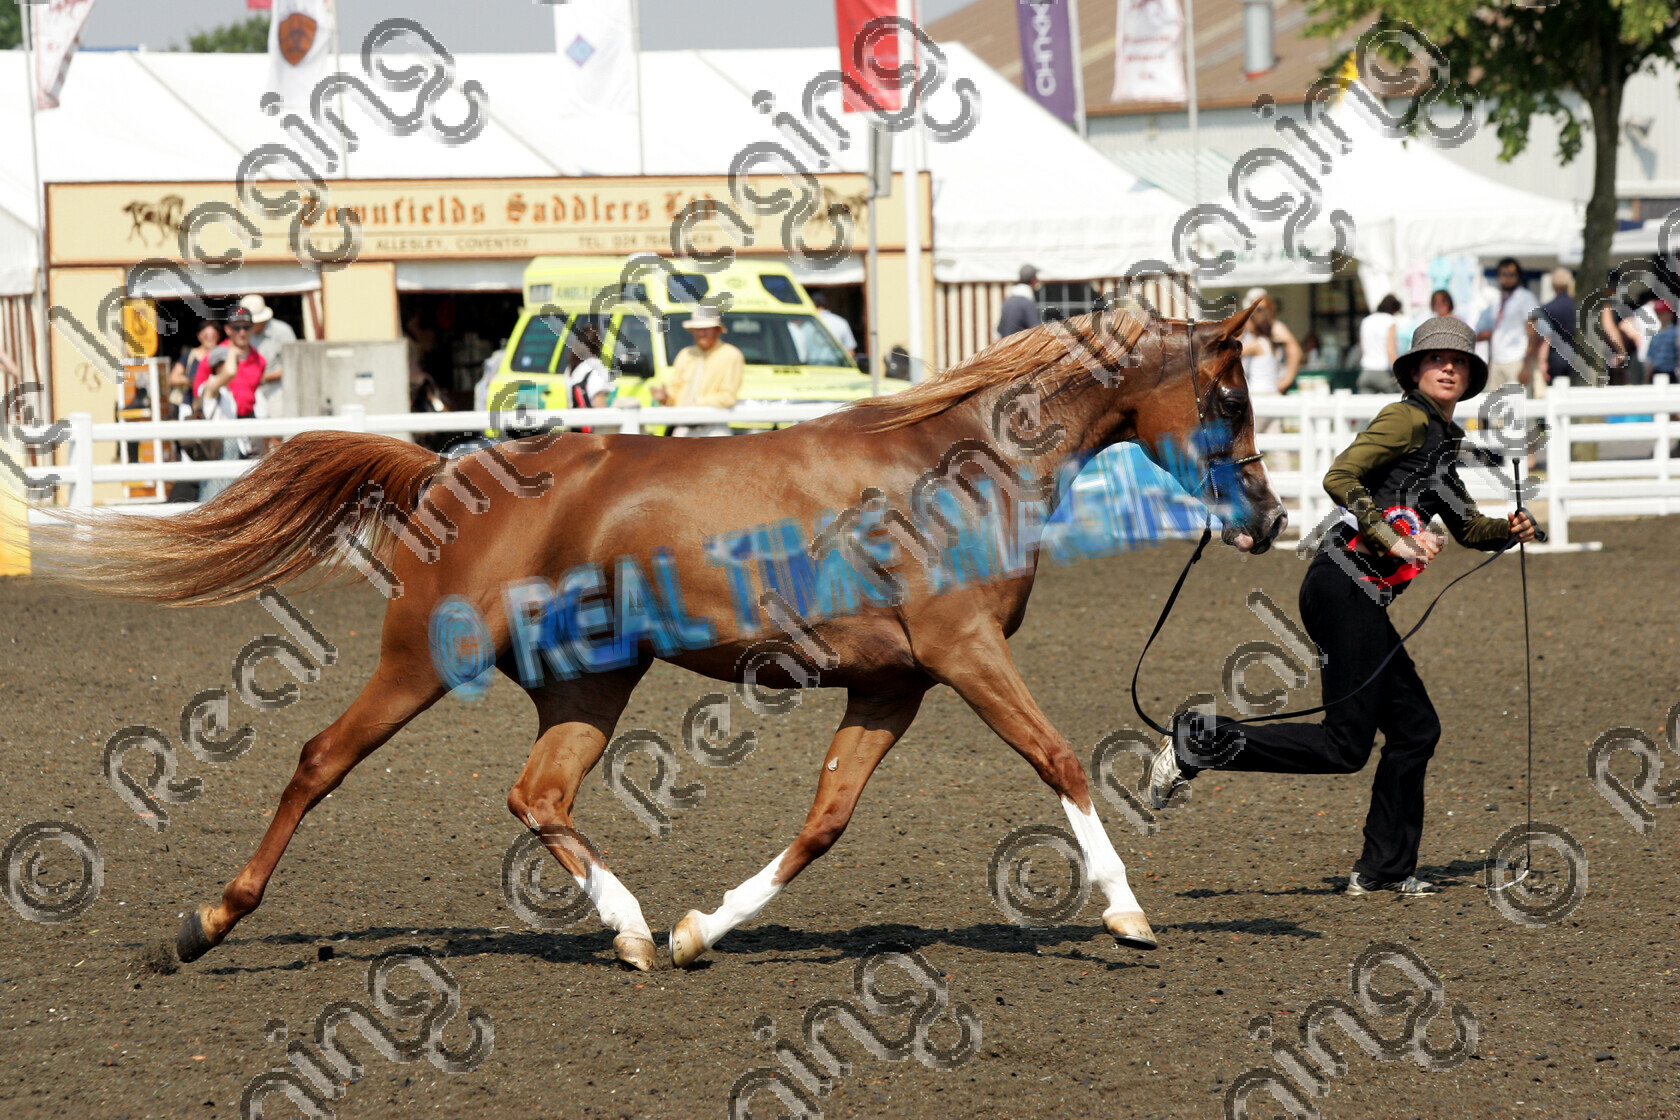 S06-31-4-103 copy 
 Keywords: The Royal Show rosette rosettes prize winner horse pony show showing Monday 3 July 2006 championship champion in hand trot trotting action moving flat 1 Prawica, Mr P Atkinson chestnut mare Pure Bred Arab